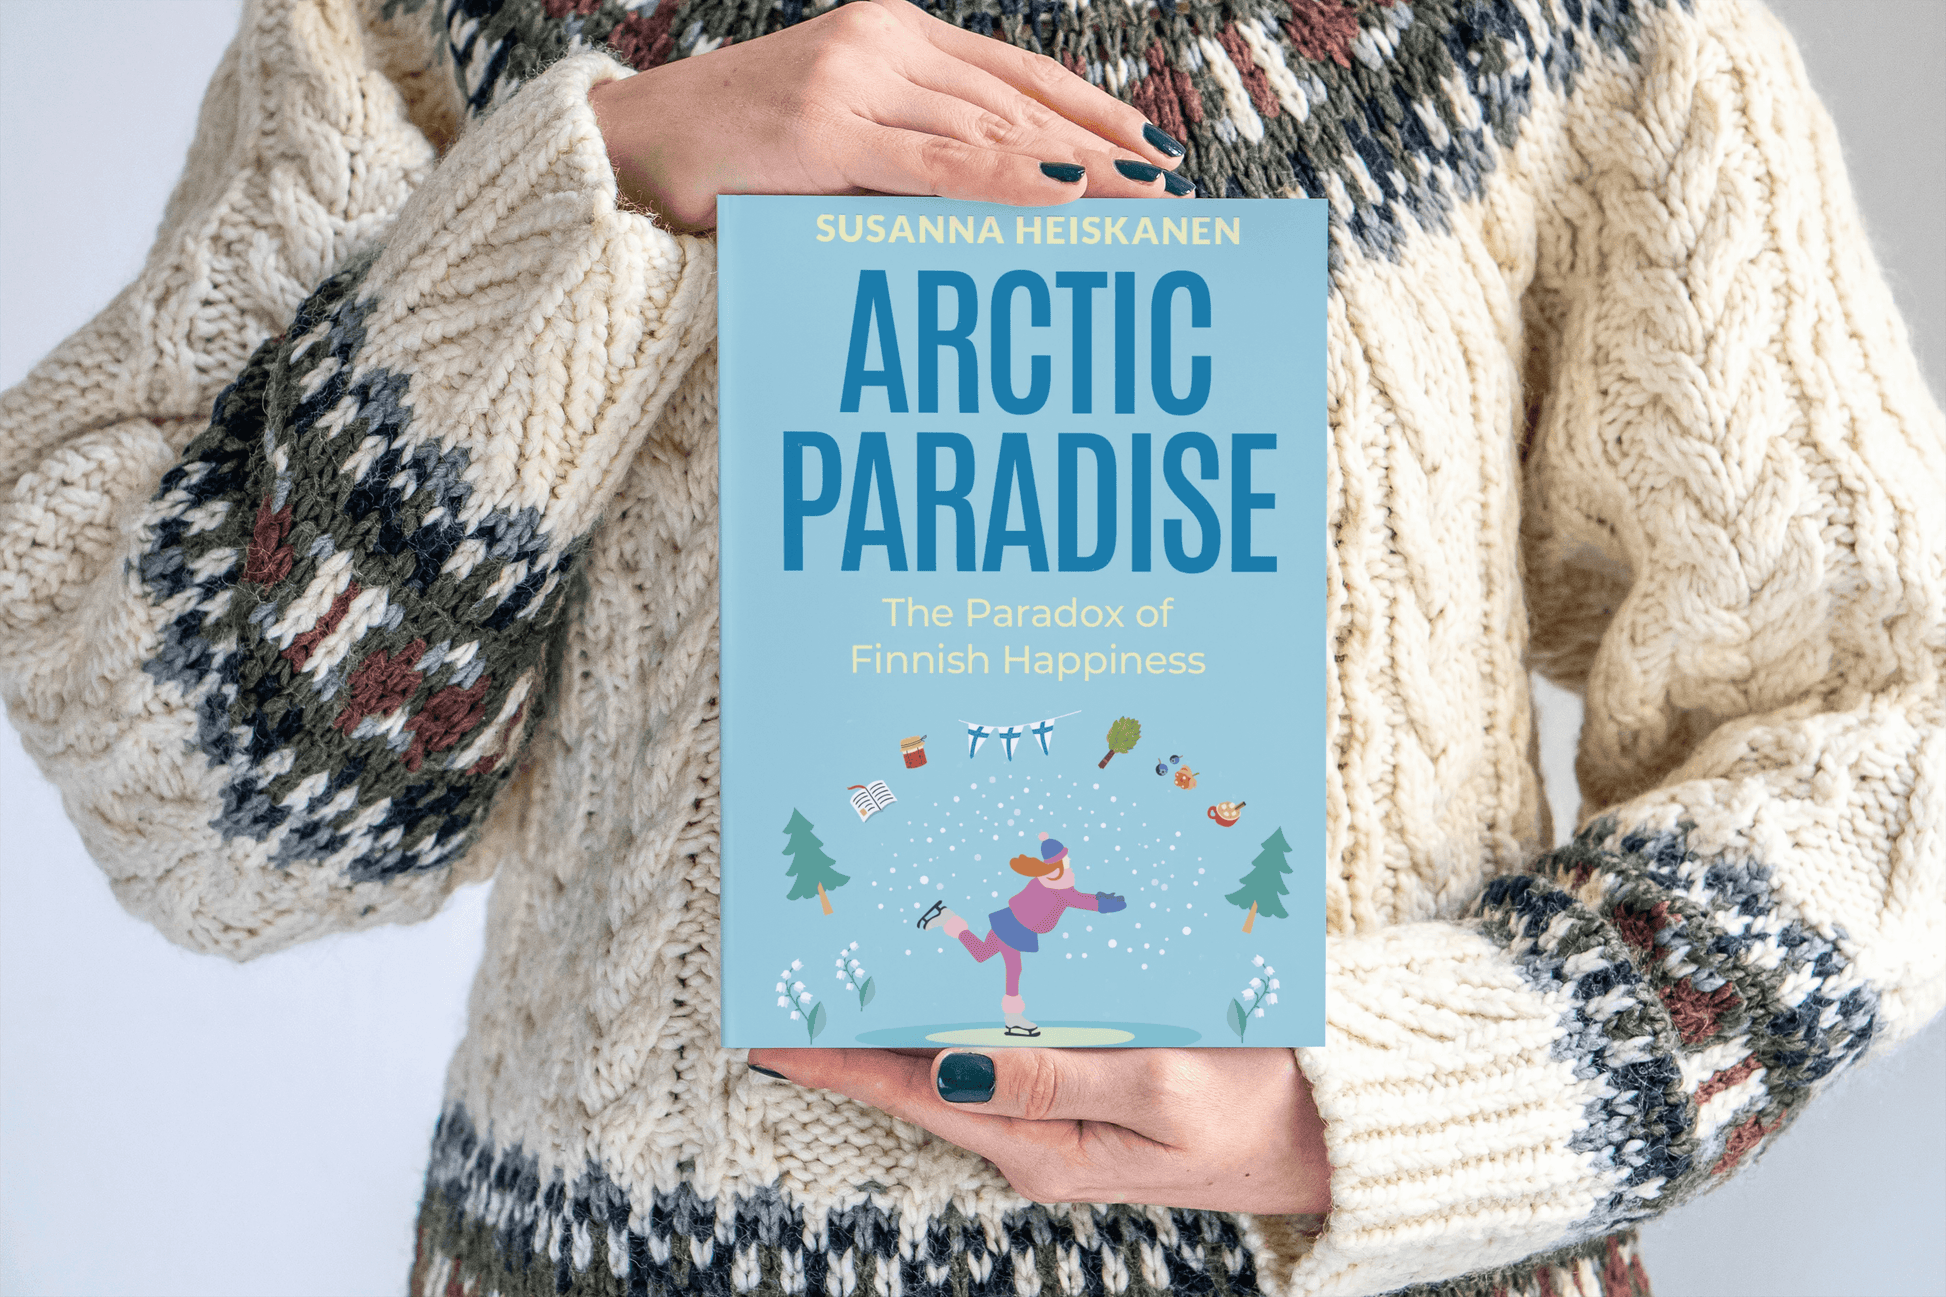 Arctic-Paradise-Paperback-Cover-Held-on-hand-with-Icelandic-Jumper